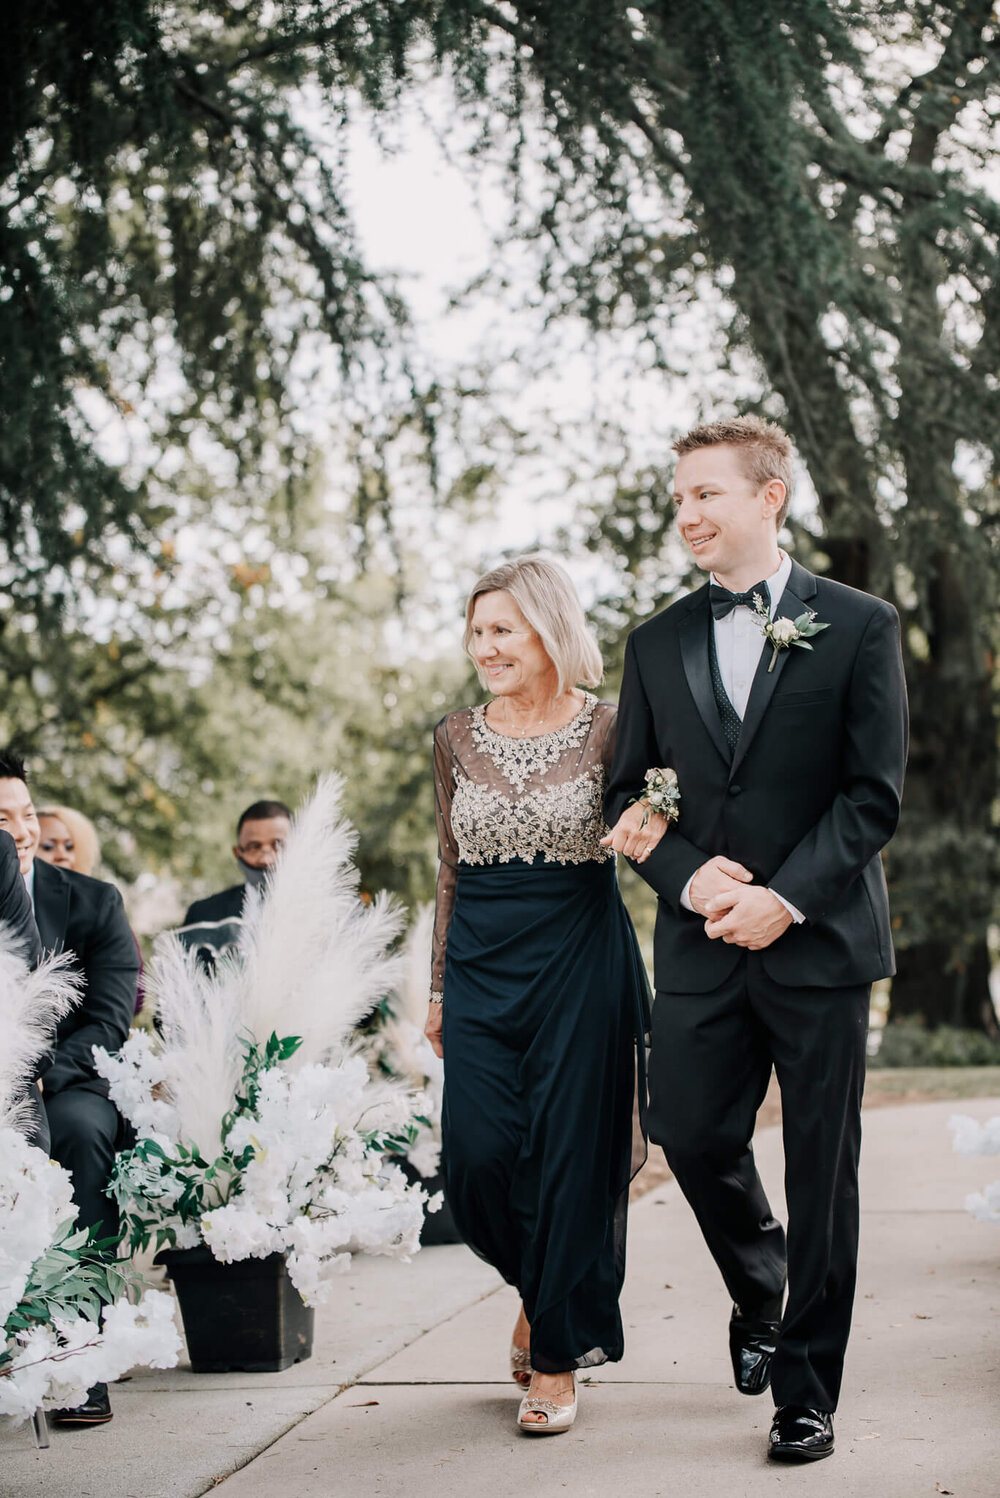 groom and his mother walking down the aisle at his wedding photographed by nick levine photography